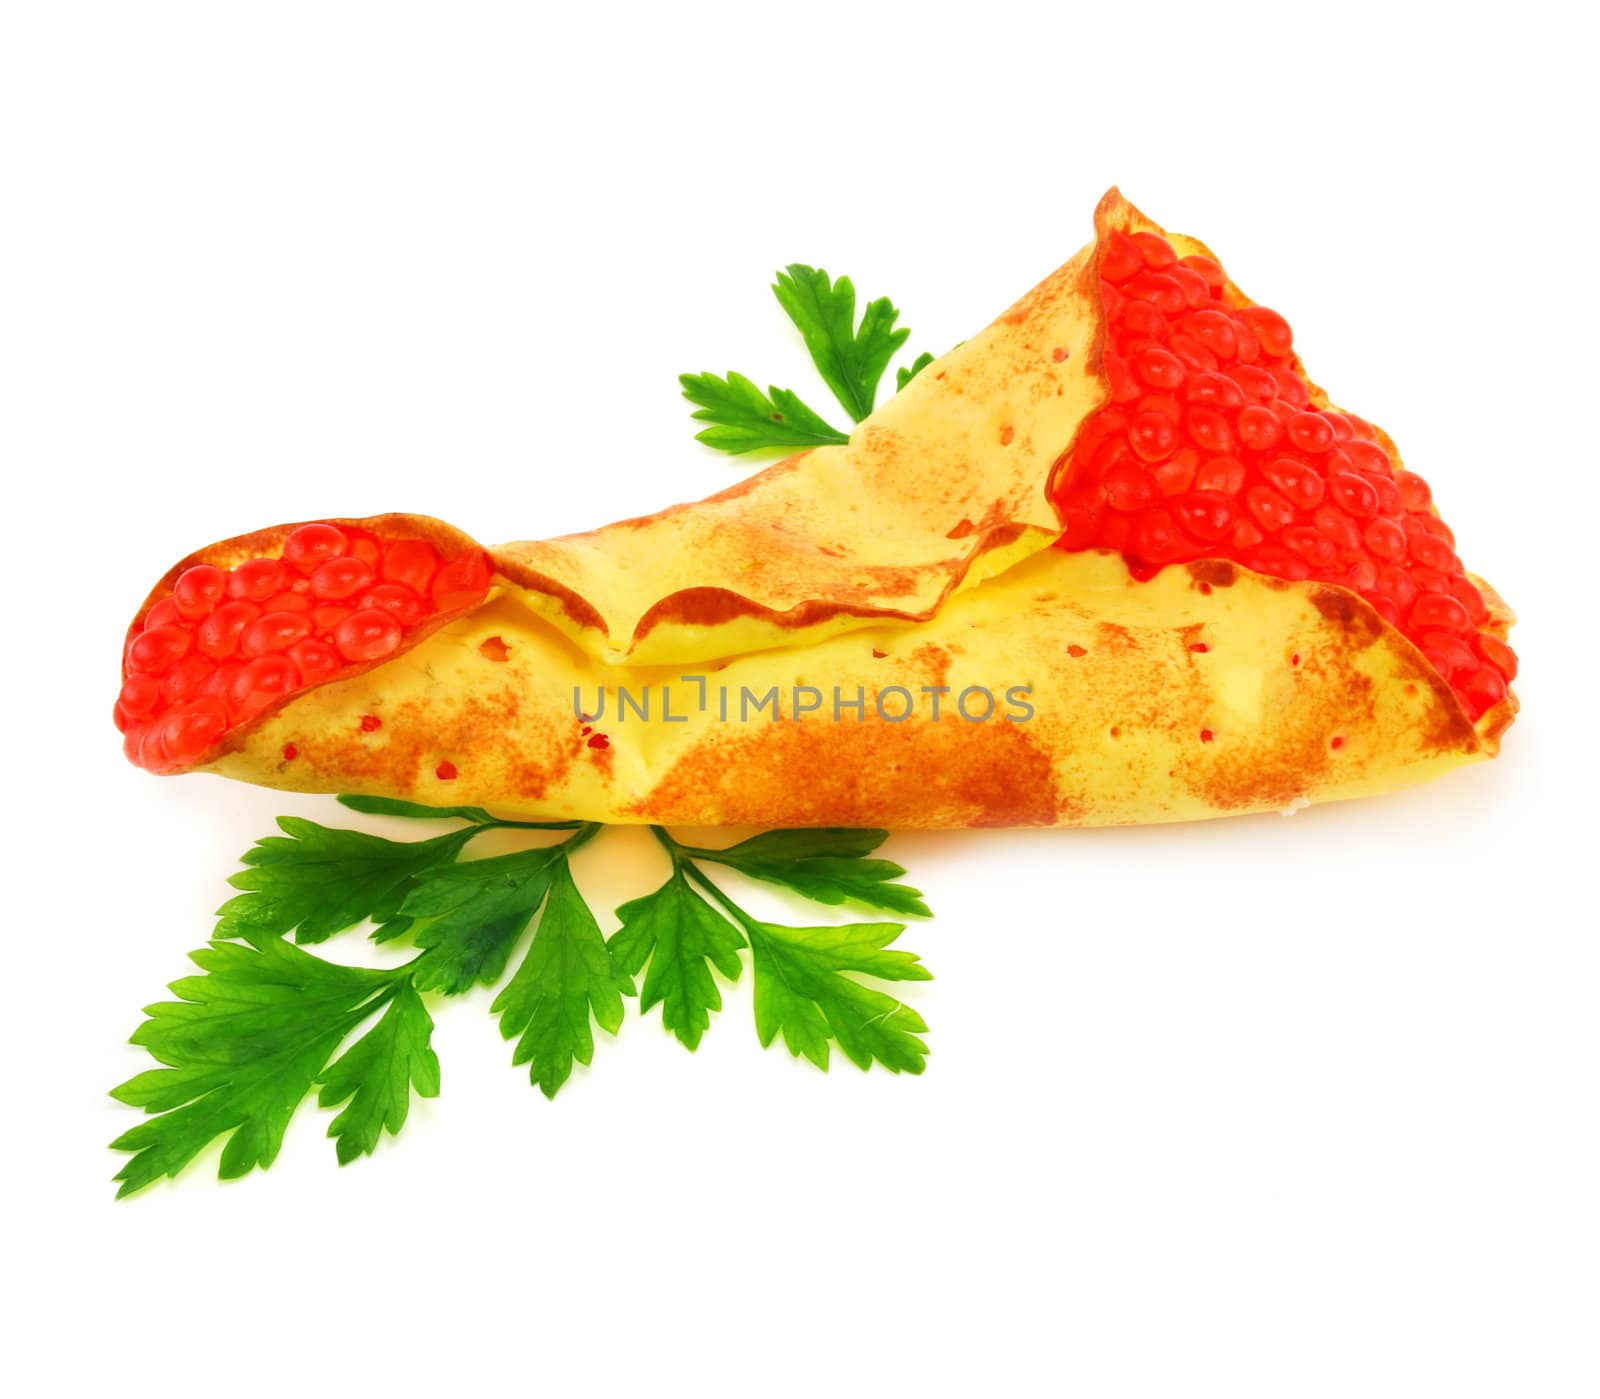 Caviar-stuffed pancake with greens isolated on a white background